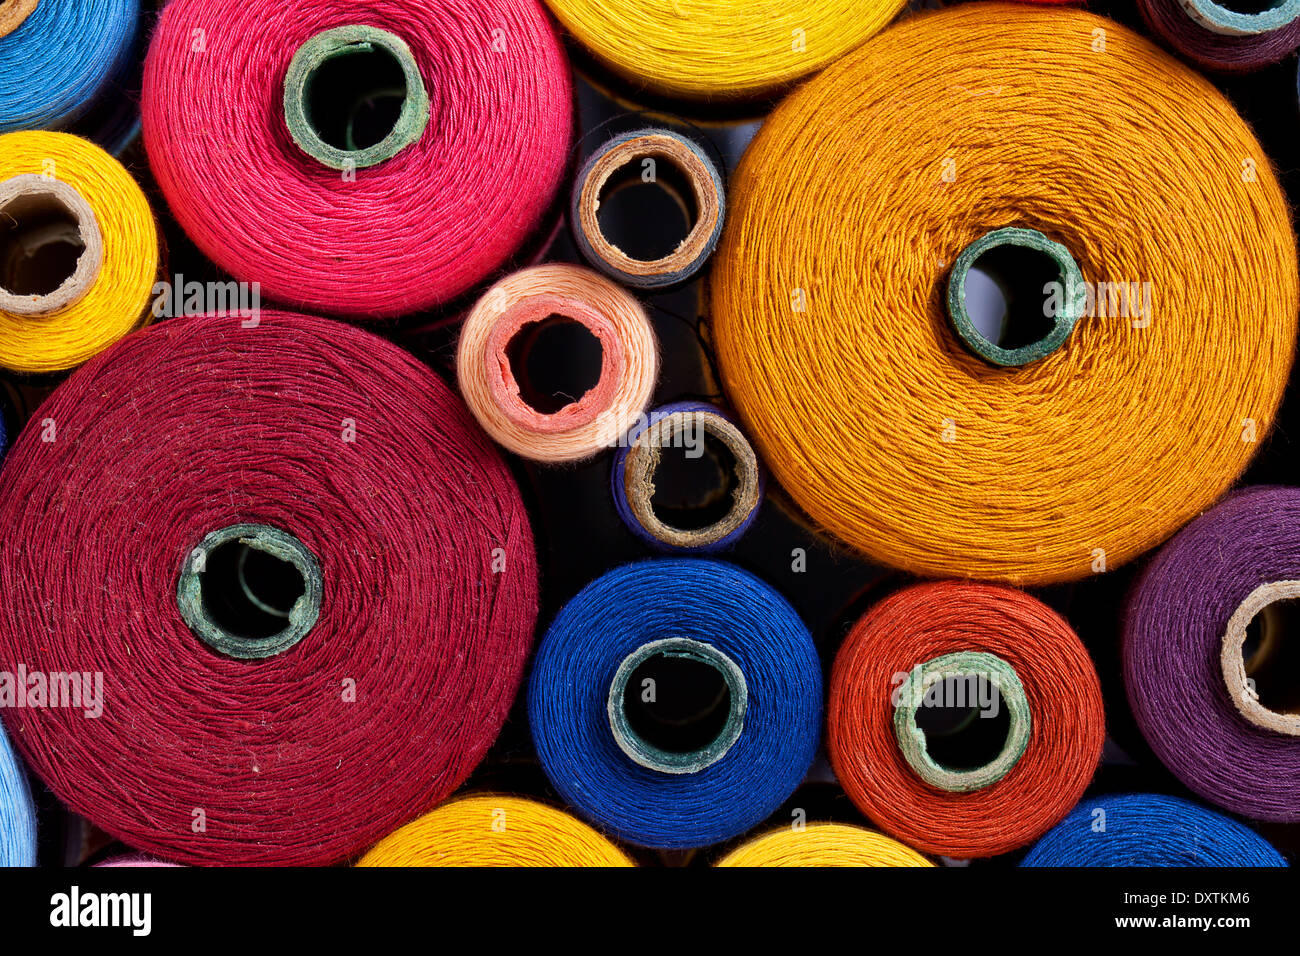 Multicolored Large Spools Of Thread In A Row Spools Of Colored